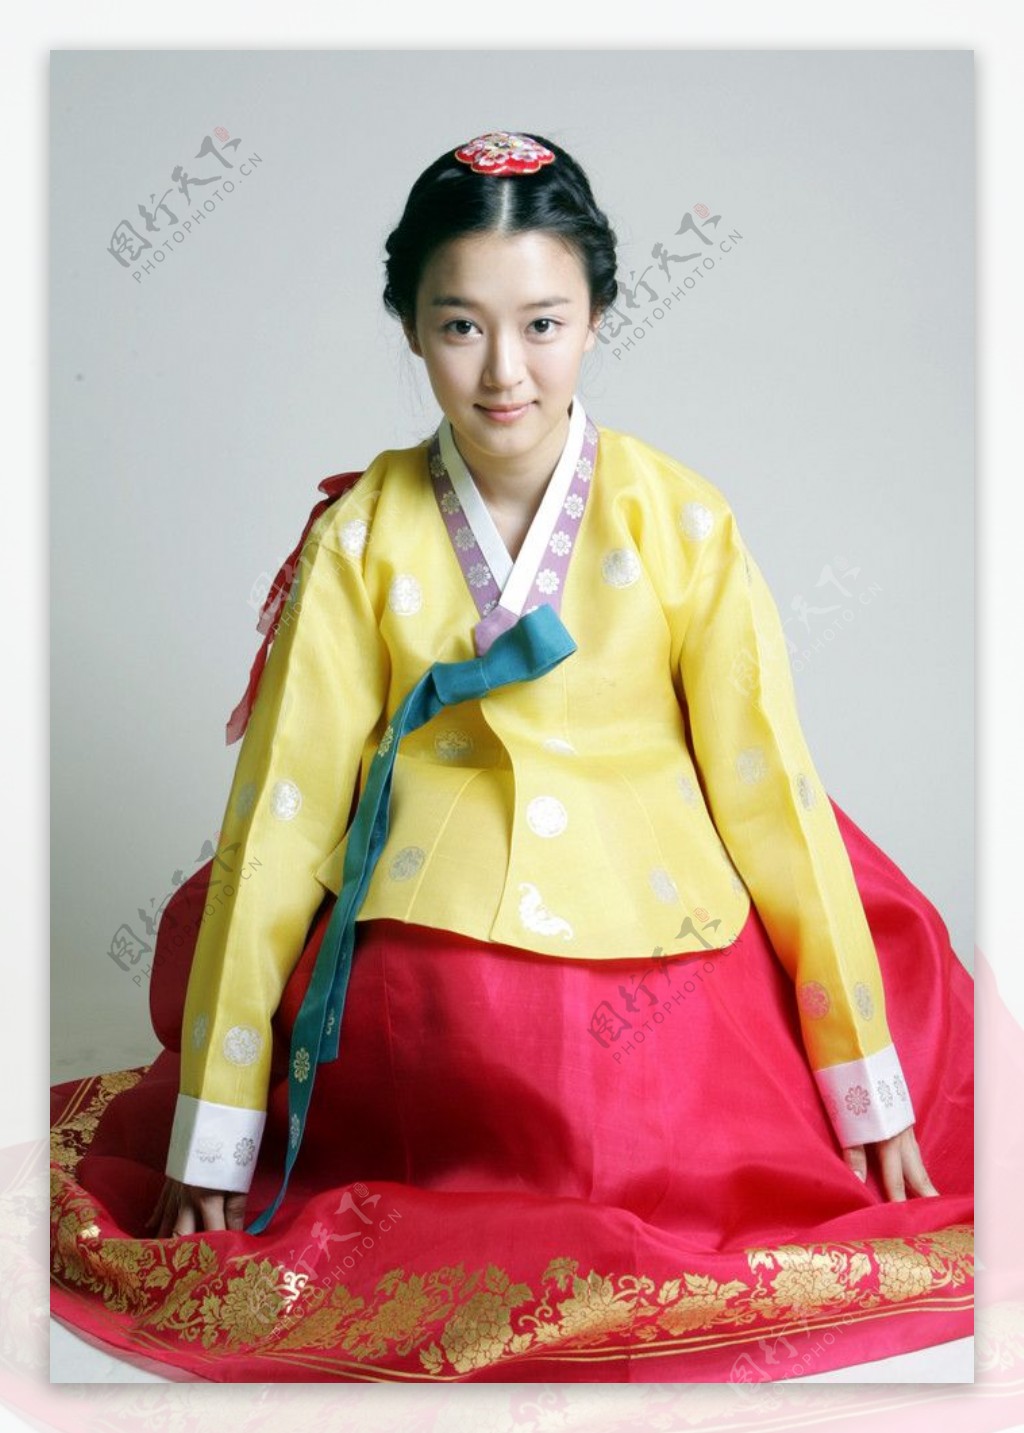 Moon Chae-Won Image - ID: 276440 - Image Abyss